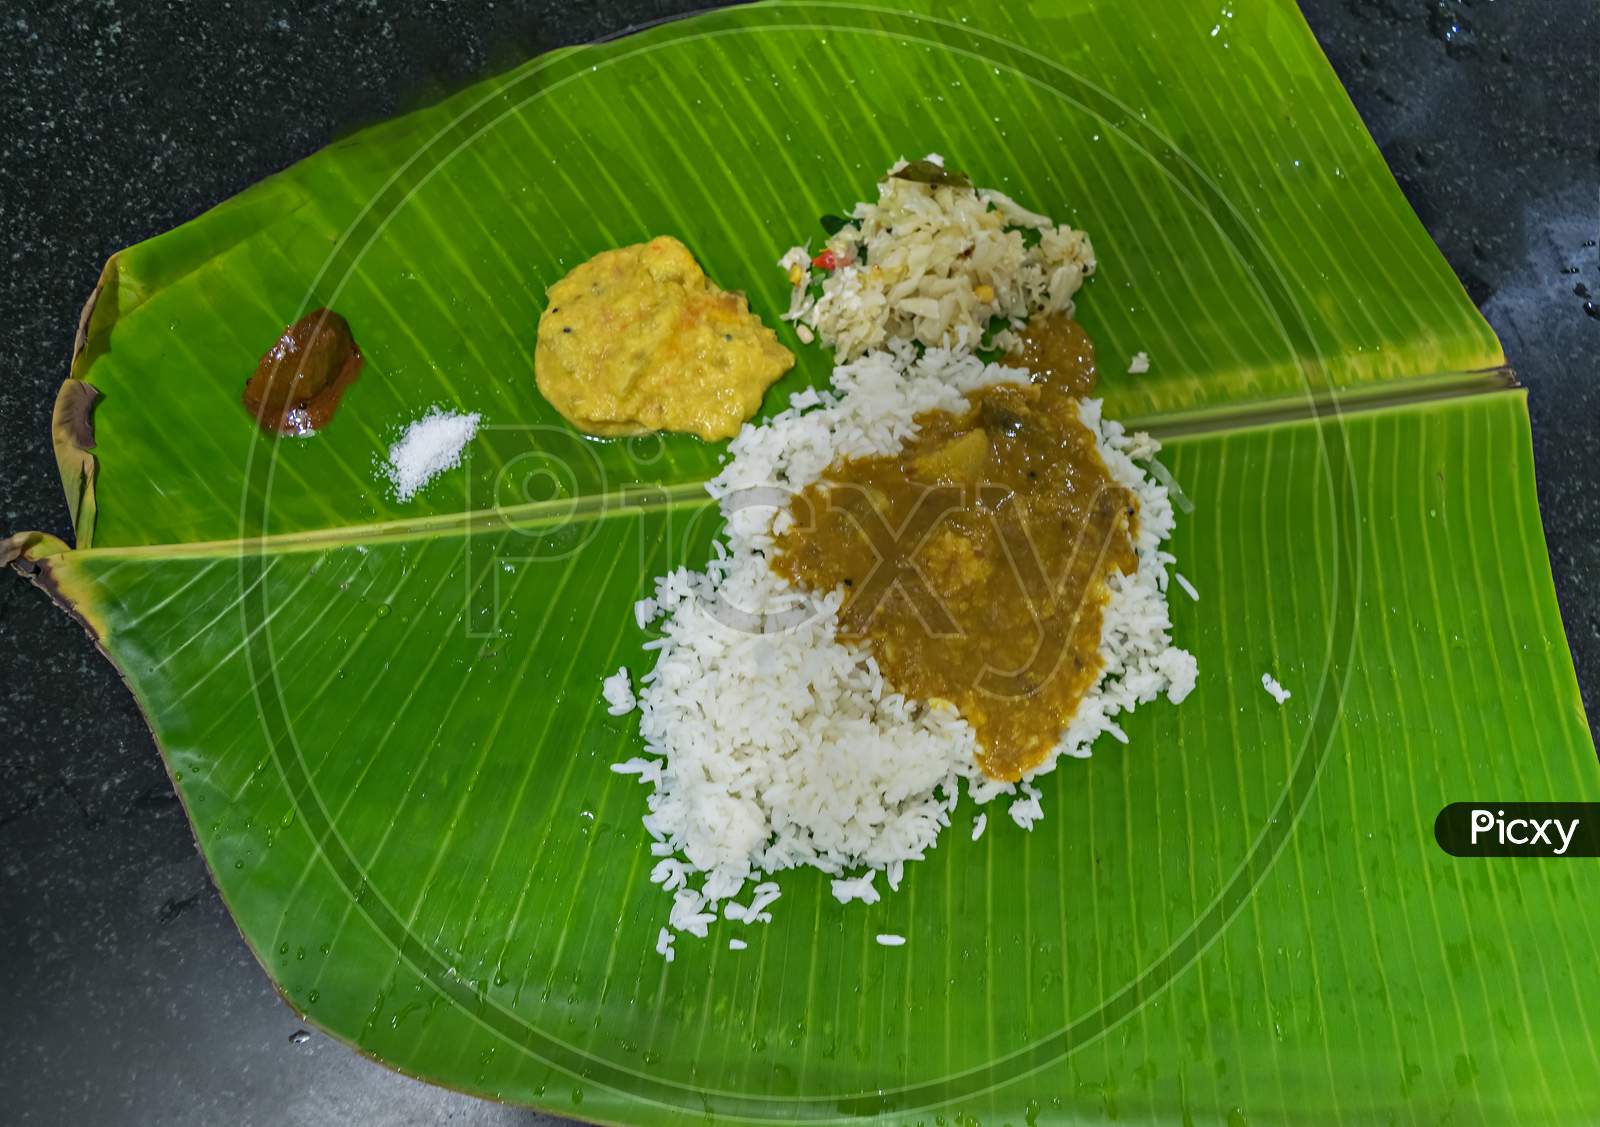 Traditional South Indian Meals Served On Banana Leaf With Rice, Curry, Pickle.